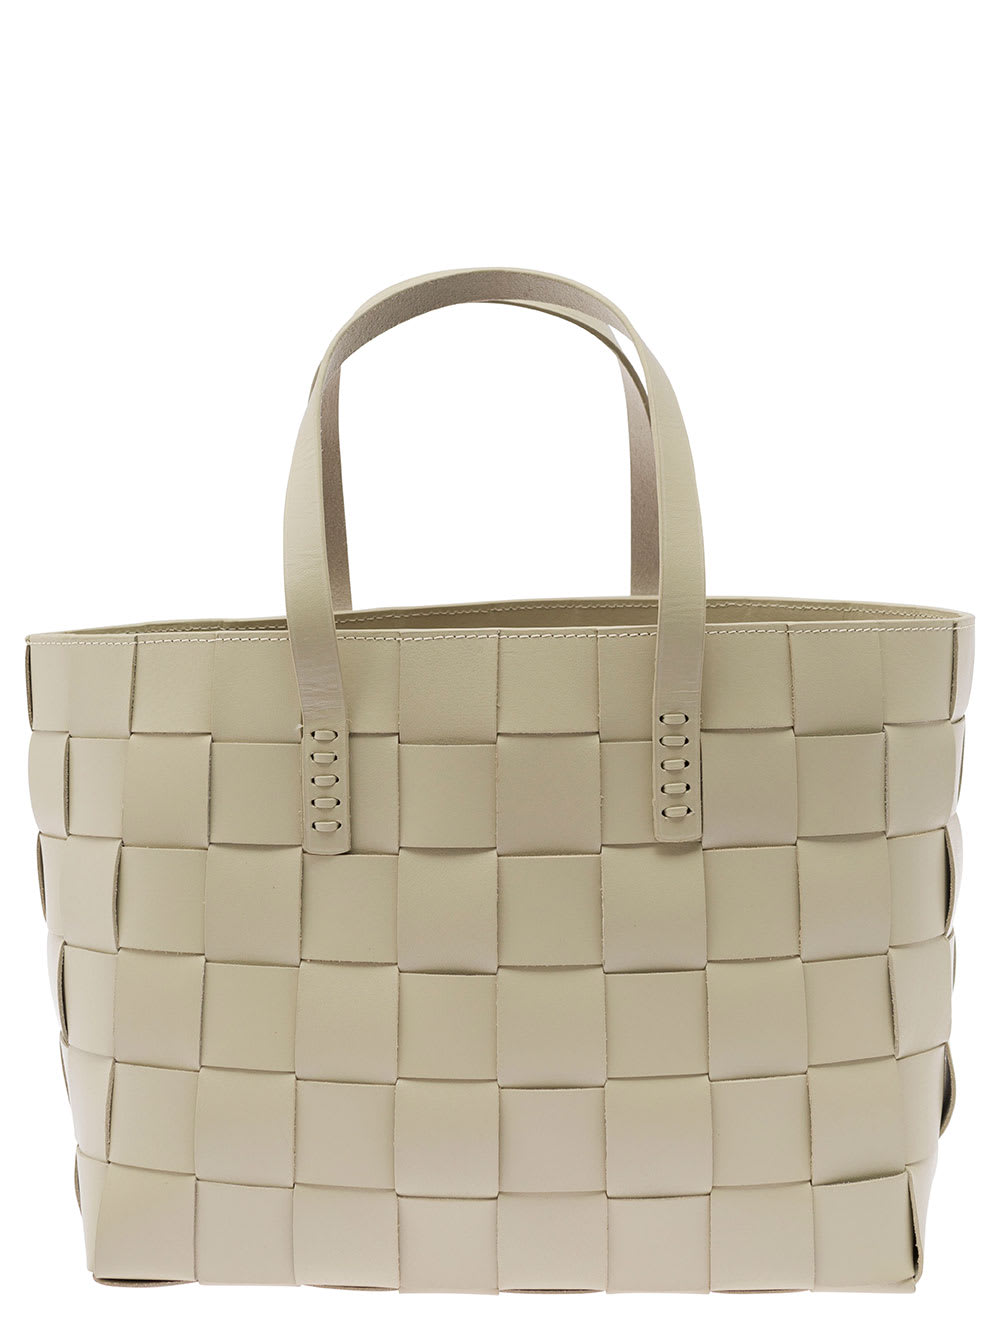 DRAGON DIFFUSION WHITE TOTE BAG WITH DOUBLE HANDLE IN WOVEN LEATHER